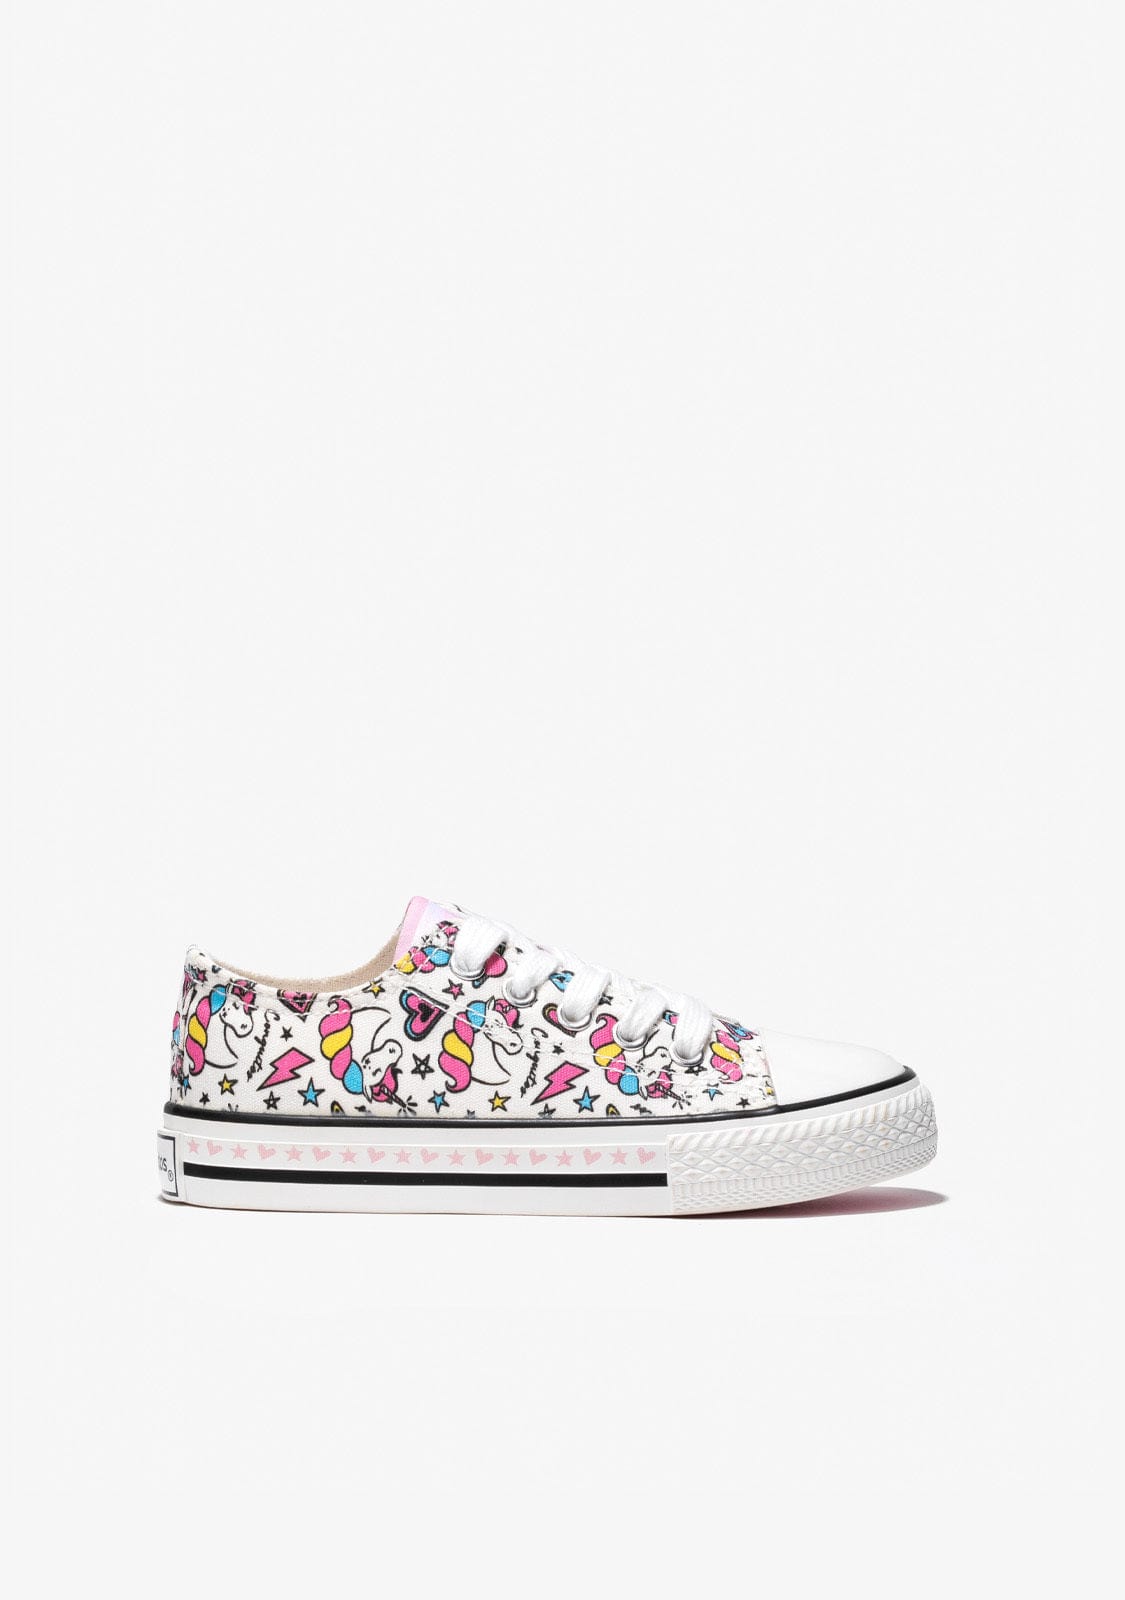 CONGUITOS Shoes Girl's White Unicorn Sneakers Canvas